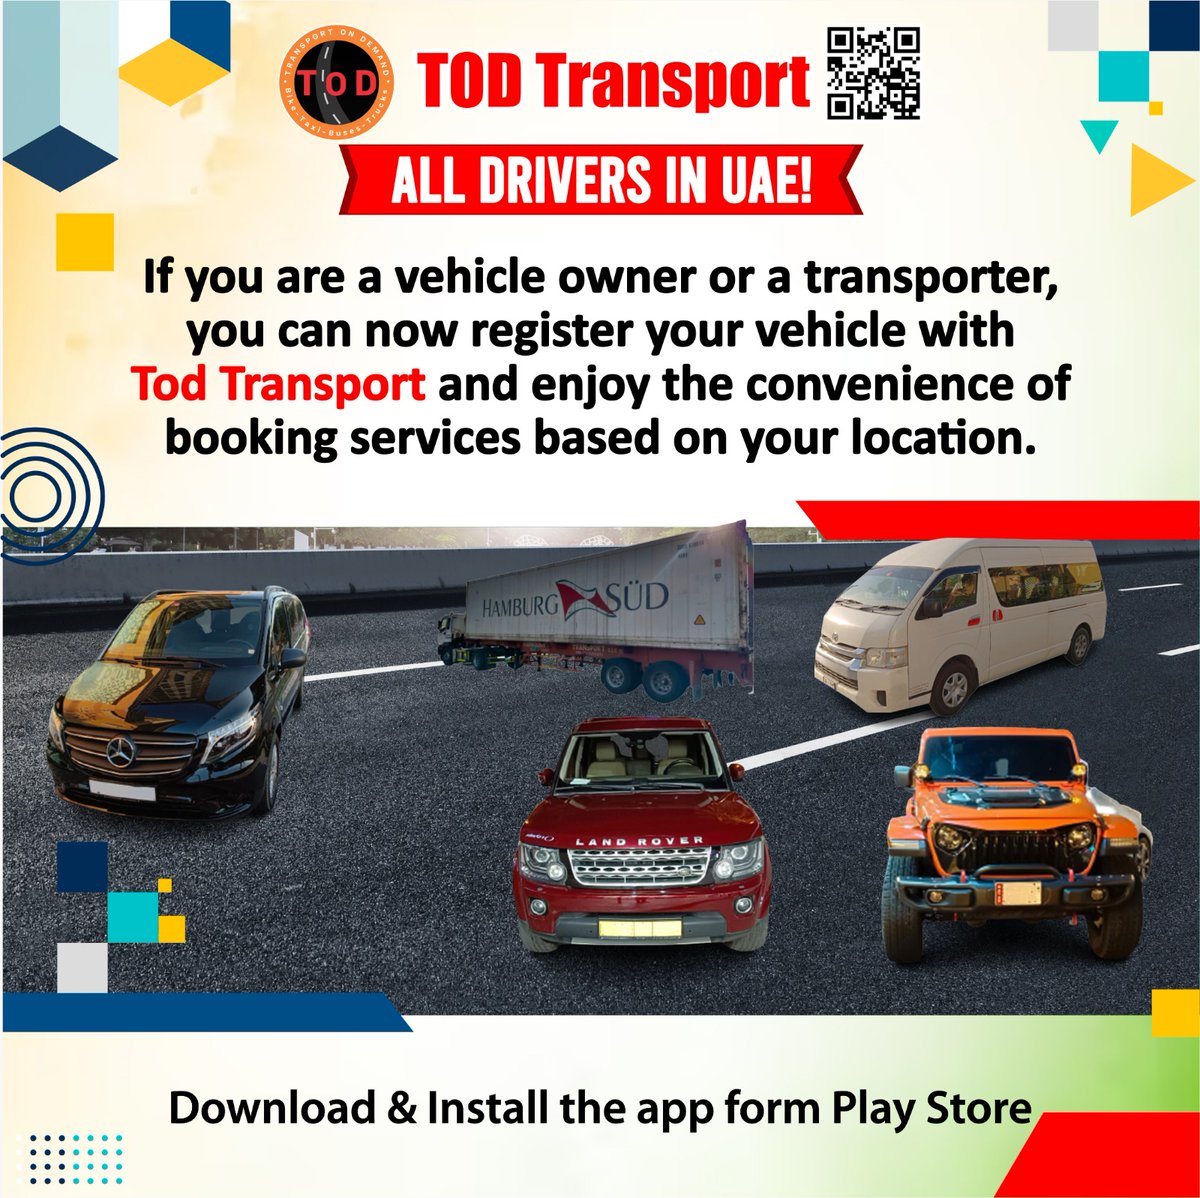 Ready to streamline your travels? TOD Transport UAE welcomes vehicle owners and transporters! Register now for 6 MONTHS of FREE bookings from registration date. Enjoy hassle-free bookings tailored to your location. #TODTransportUAE #EffortlessTravel #SmartBooking